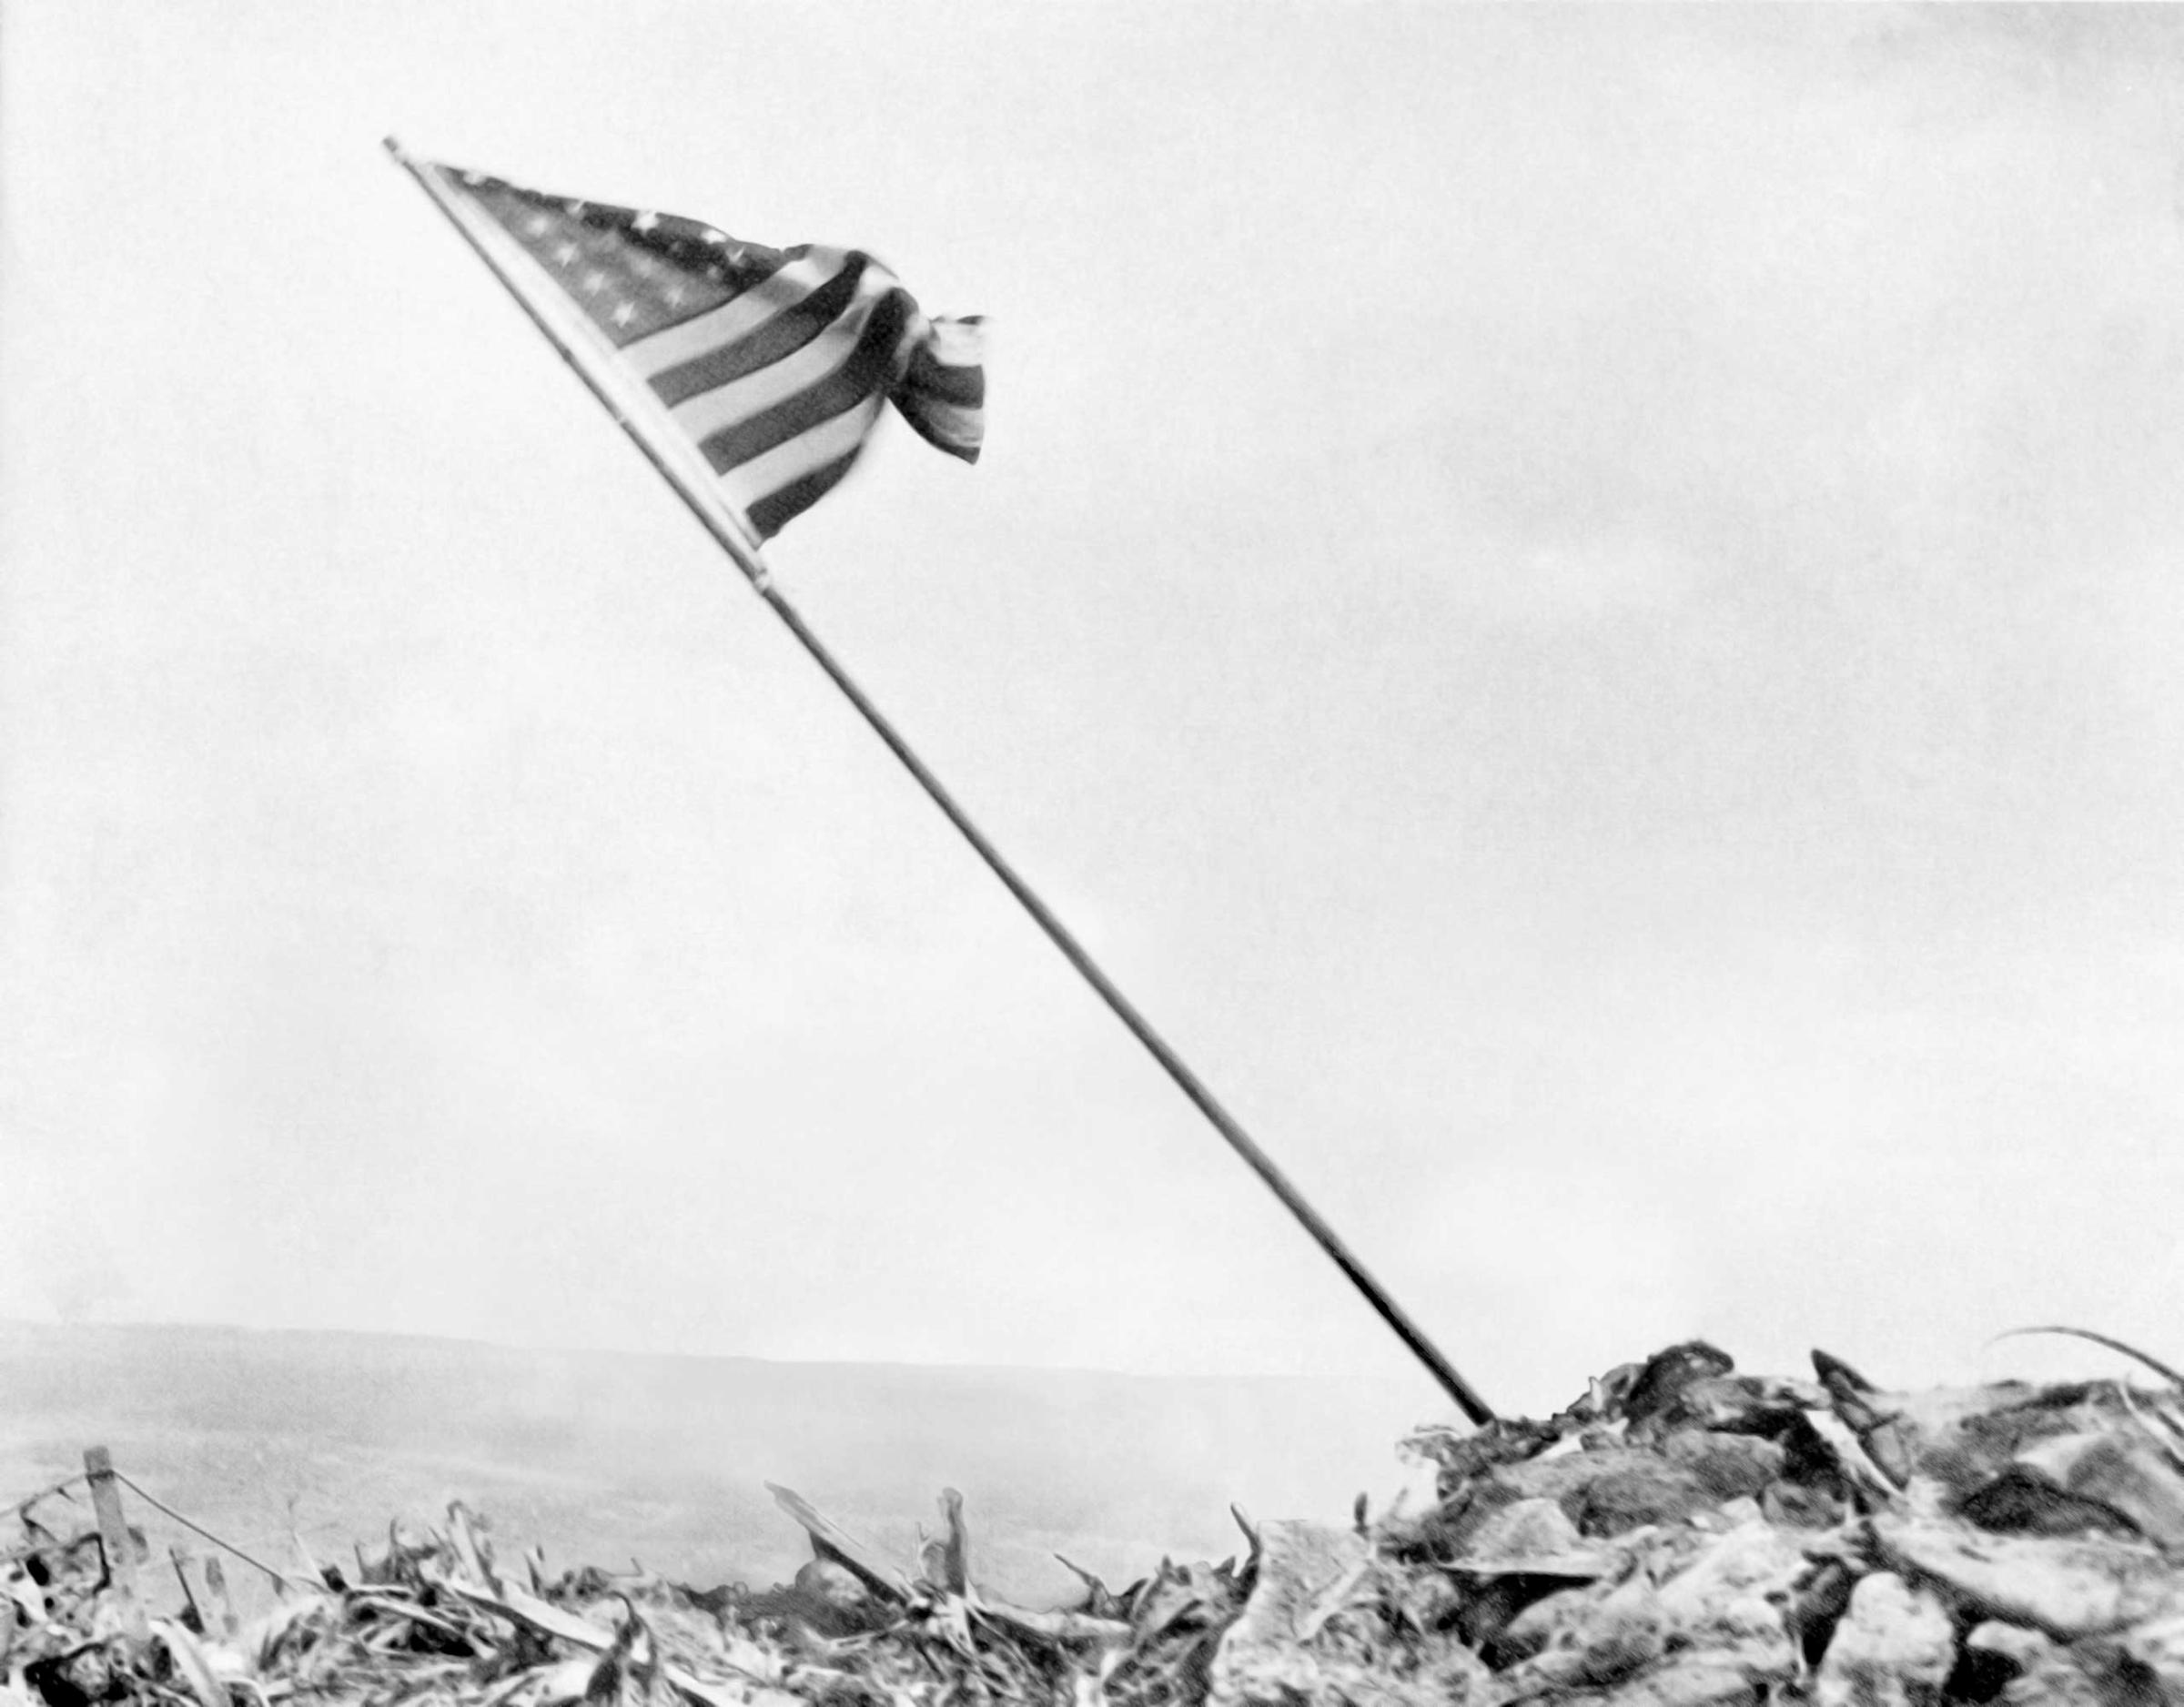 Members of the United States Marine Corps raise the American flag on Mount Suribachi on February 23, 1945 after the Battle of Iwo Jima, one of the most costly battles of the Pacific campaign during World War II. More than 6,000 United States Marines fell during the capture of the island.